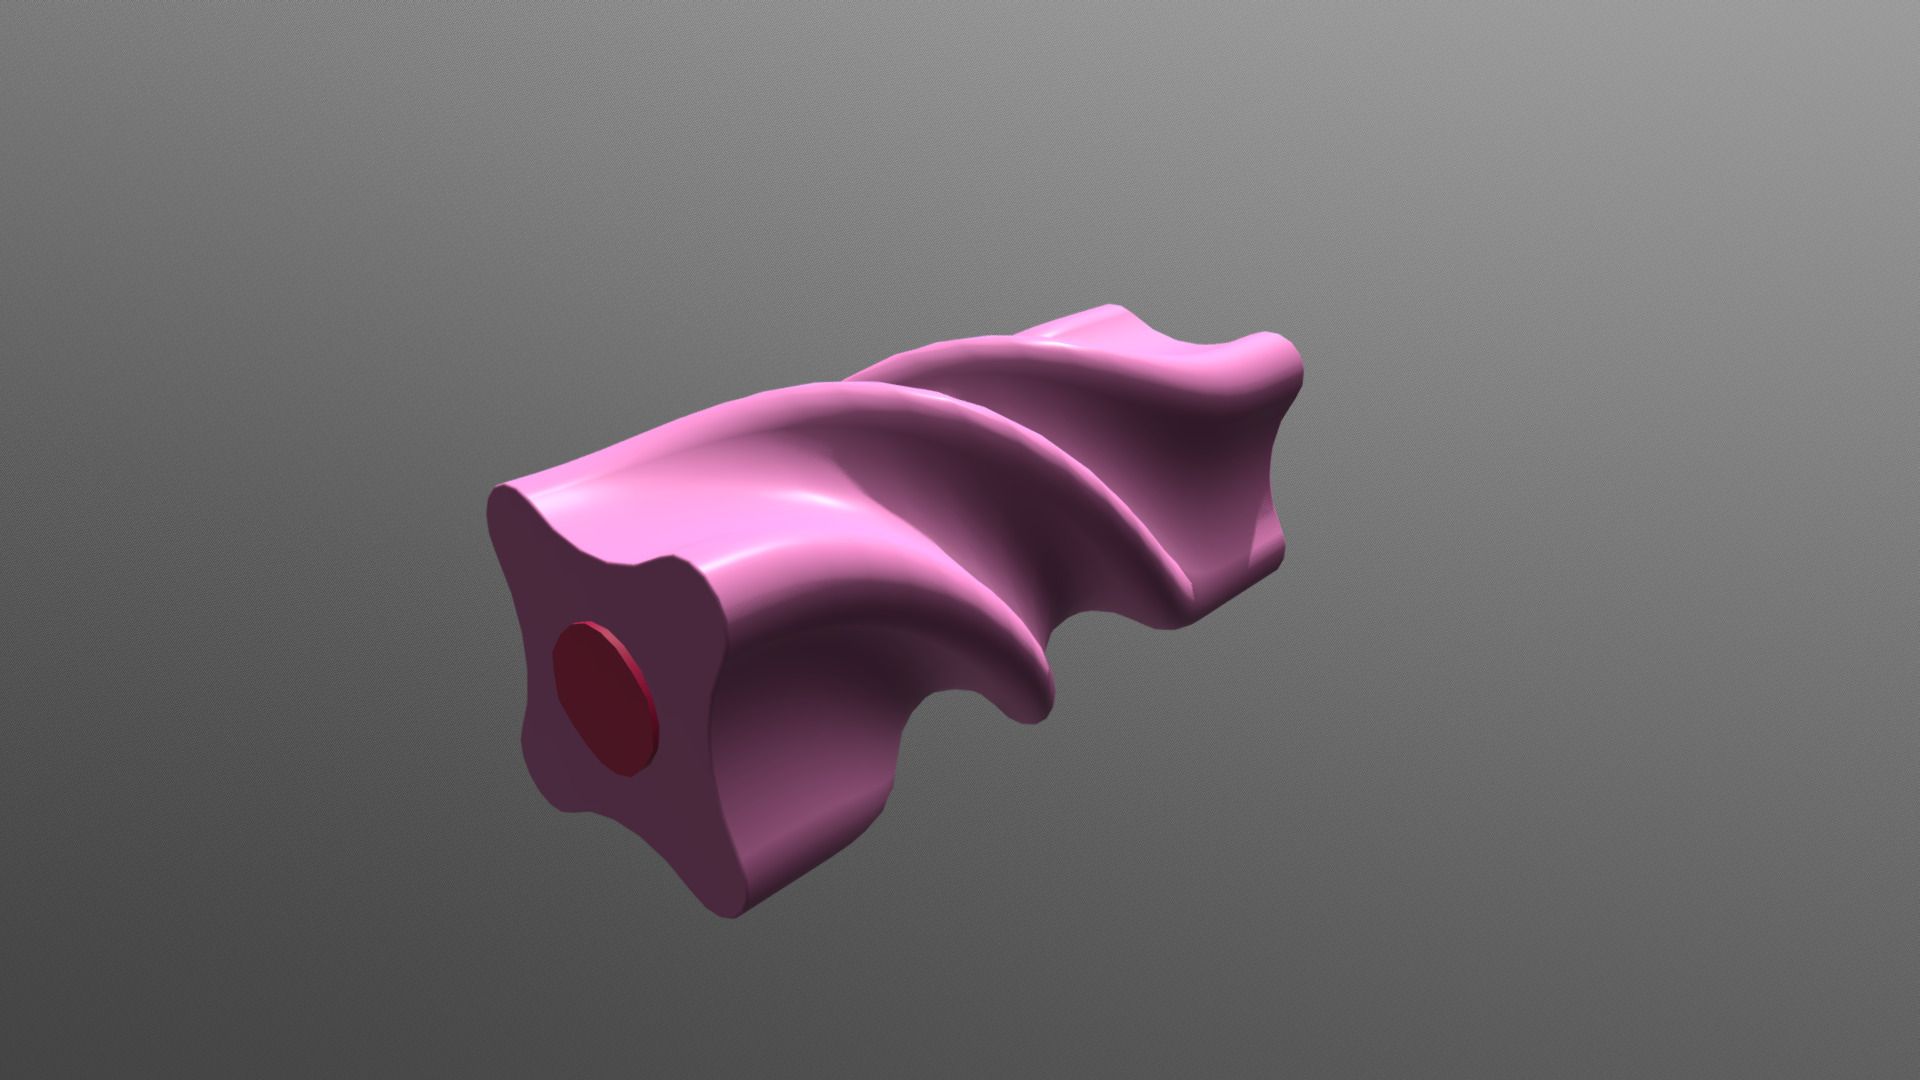 3D model candy - This is a 3D model of the candy. The 3D model is about a pink heart shaped object.